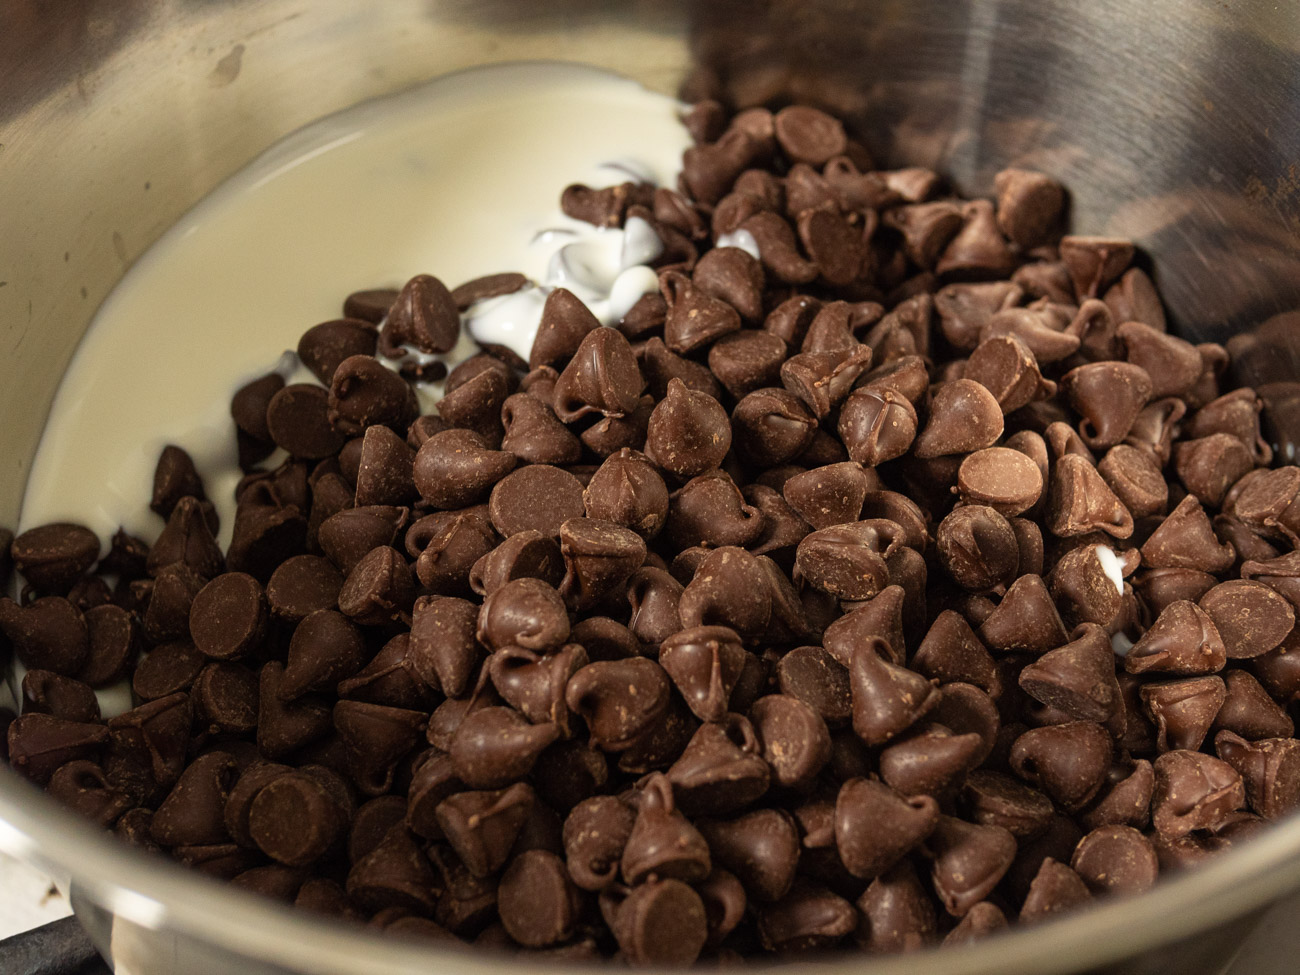 In a medium saucepan combine 1/4 cup of cream with 10 ounces (1 2/3 cups) chocolate chips. Whisk until smooth, but do not overheat. Add to this mixture vanilla, eggs, and salt and blend until smooth.